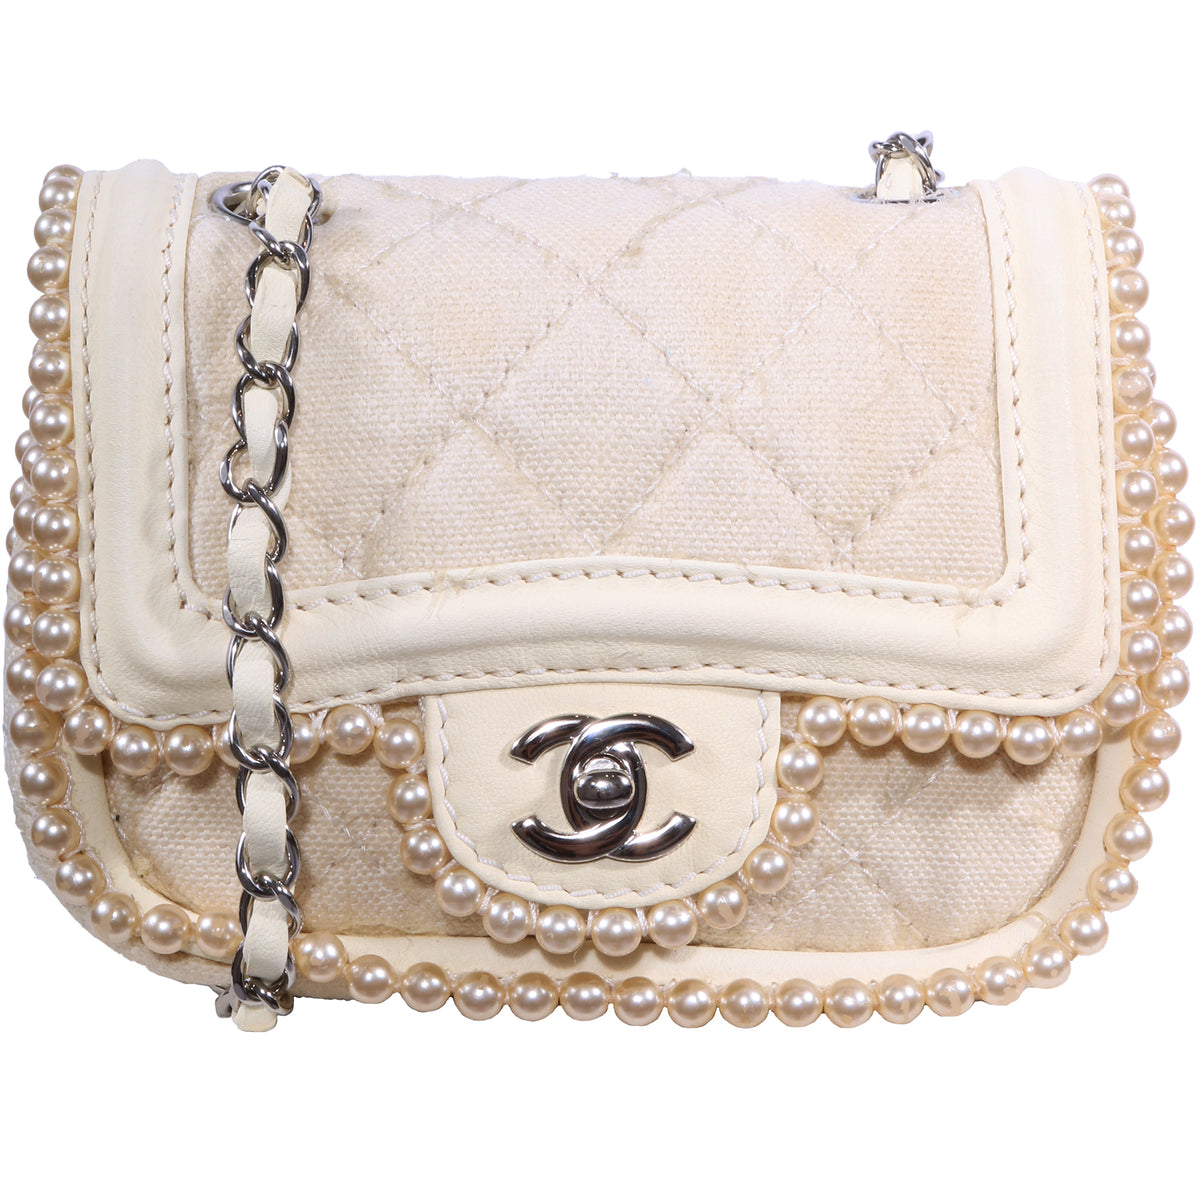 Chanel Vintage Classic Single Flap Bag Quilted Printed Canvas Maxi -  BrandConscious Authentics